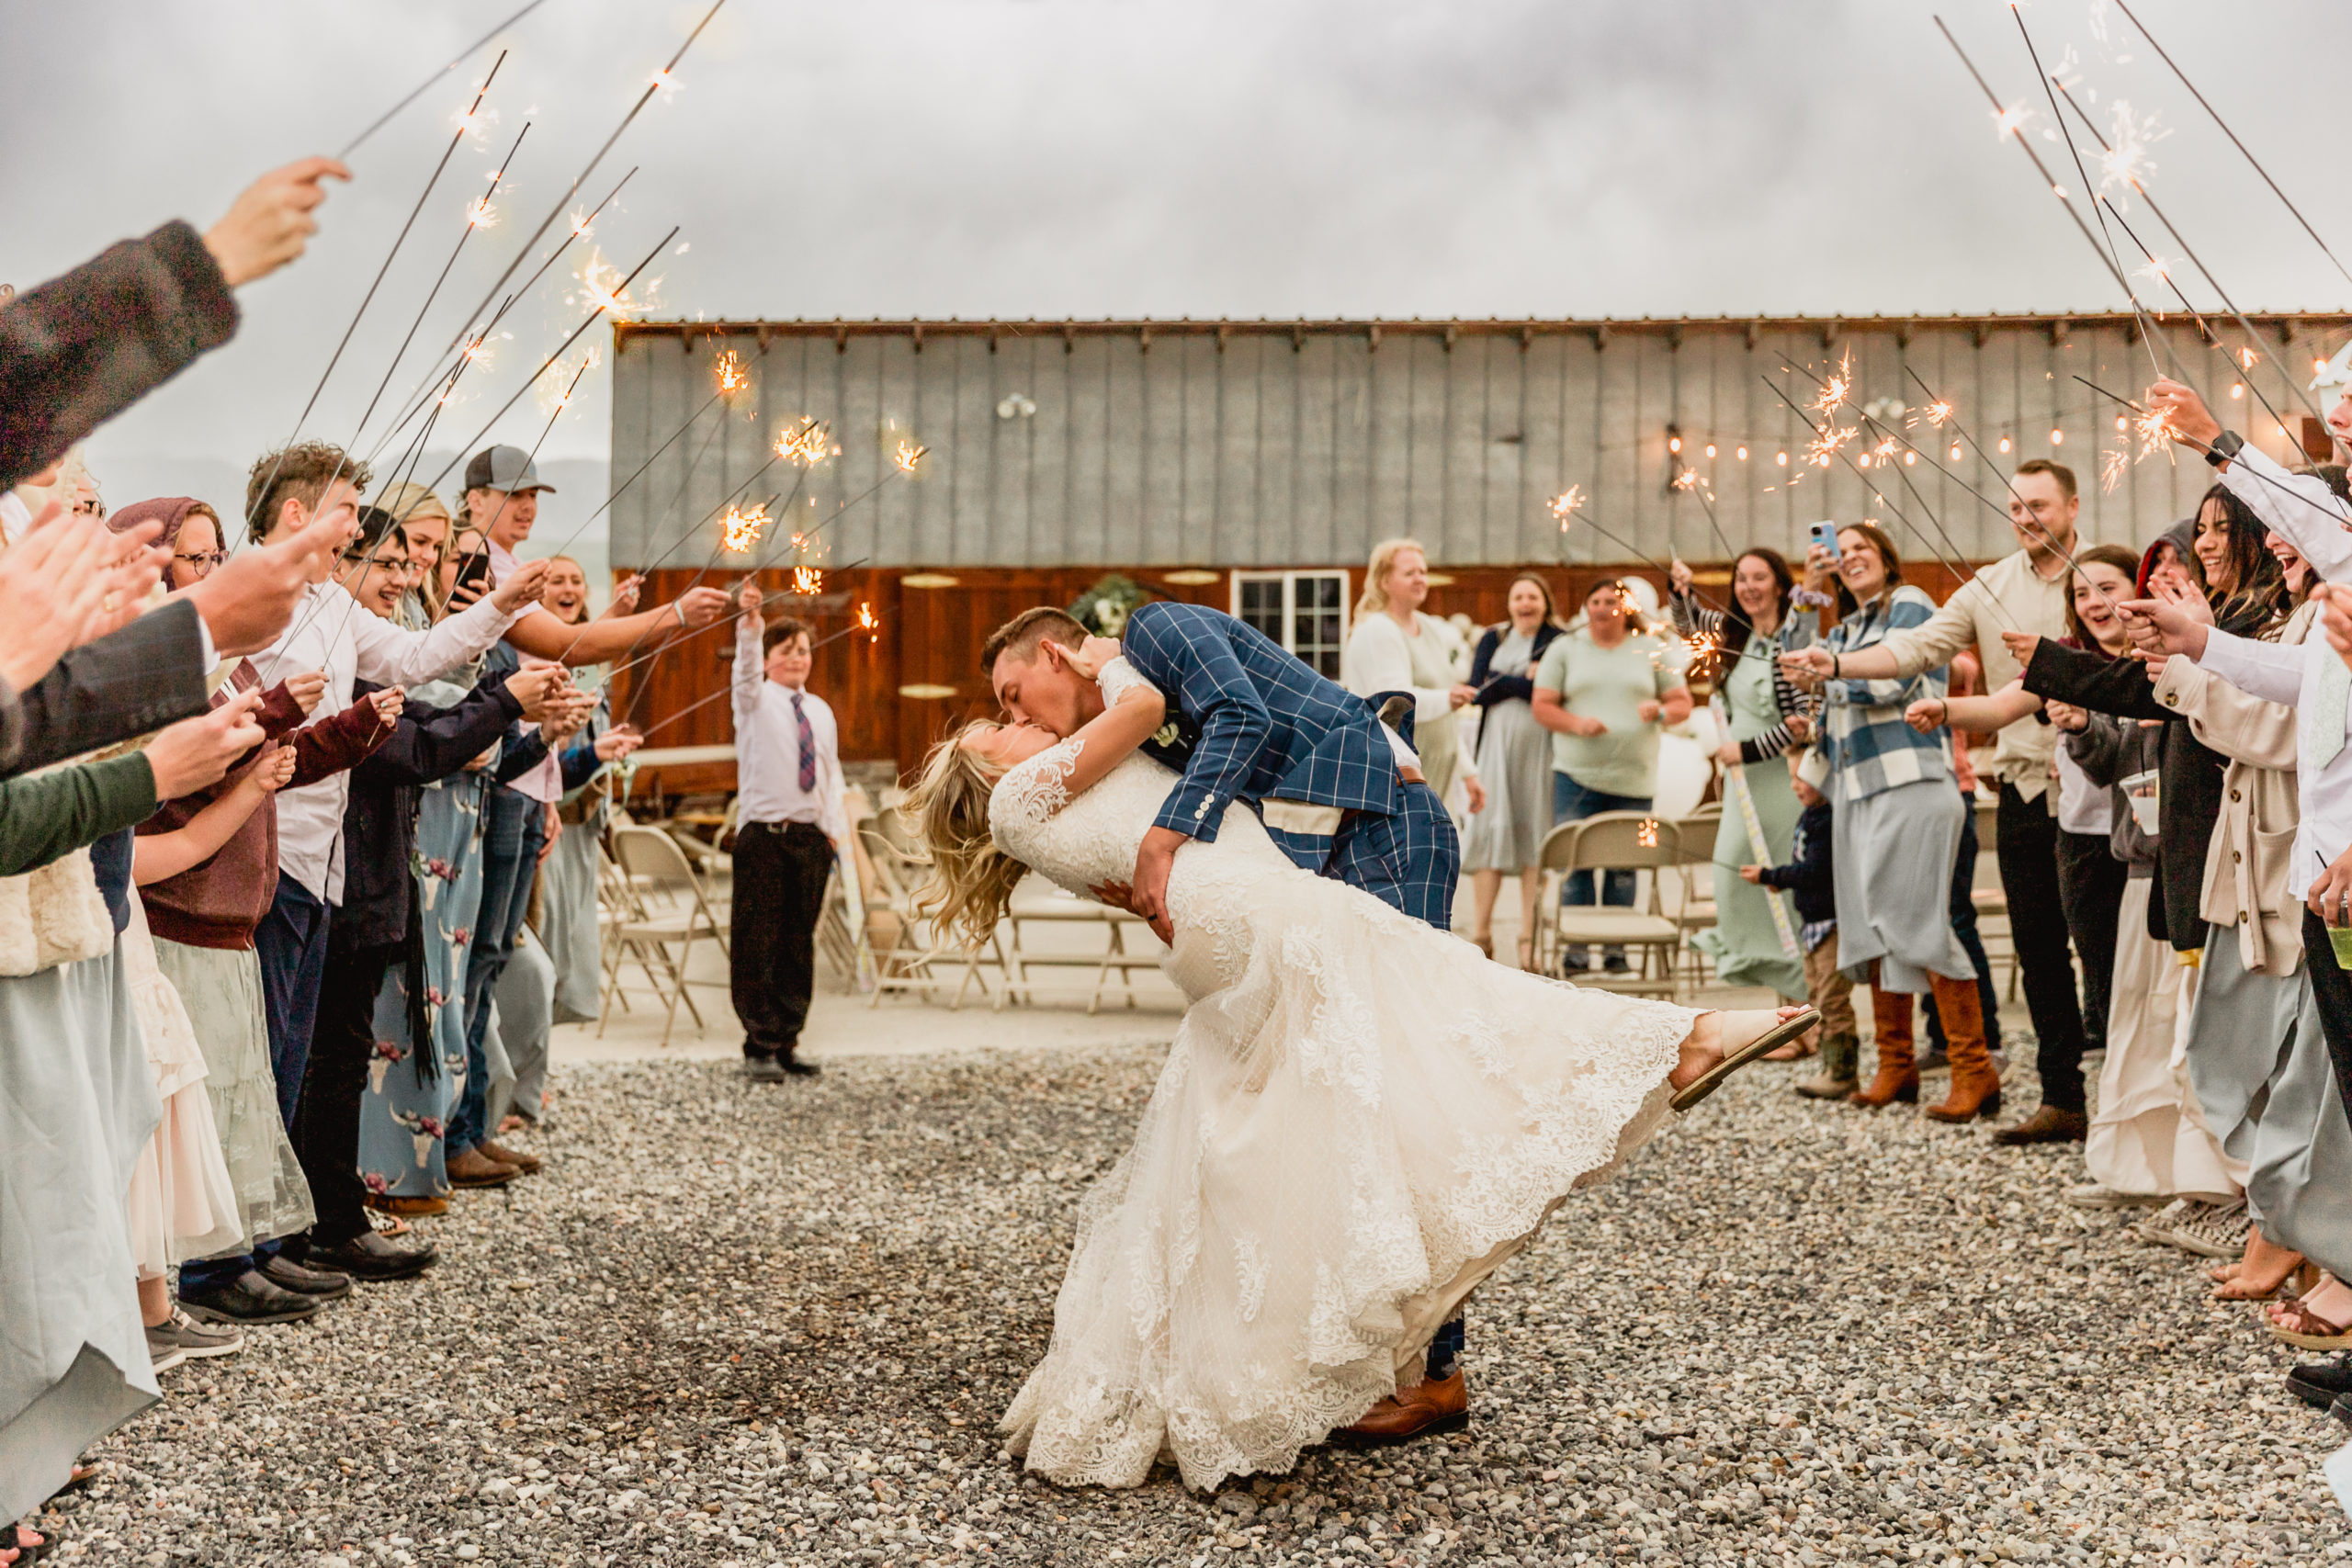 Bride and groom share a kiss as their wedding guests hold up sparklers, captured by Robin Kunzler Photo